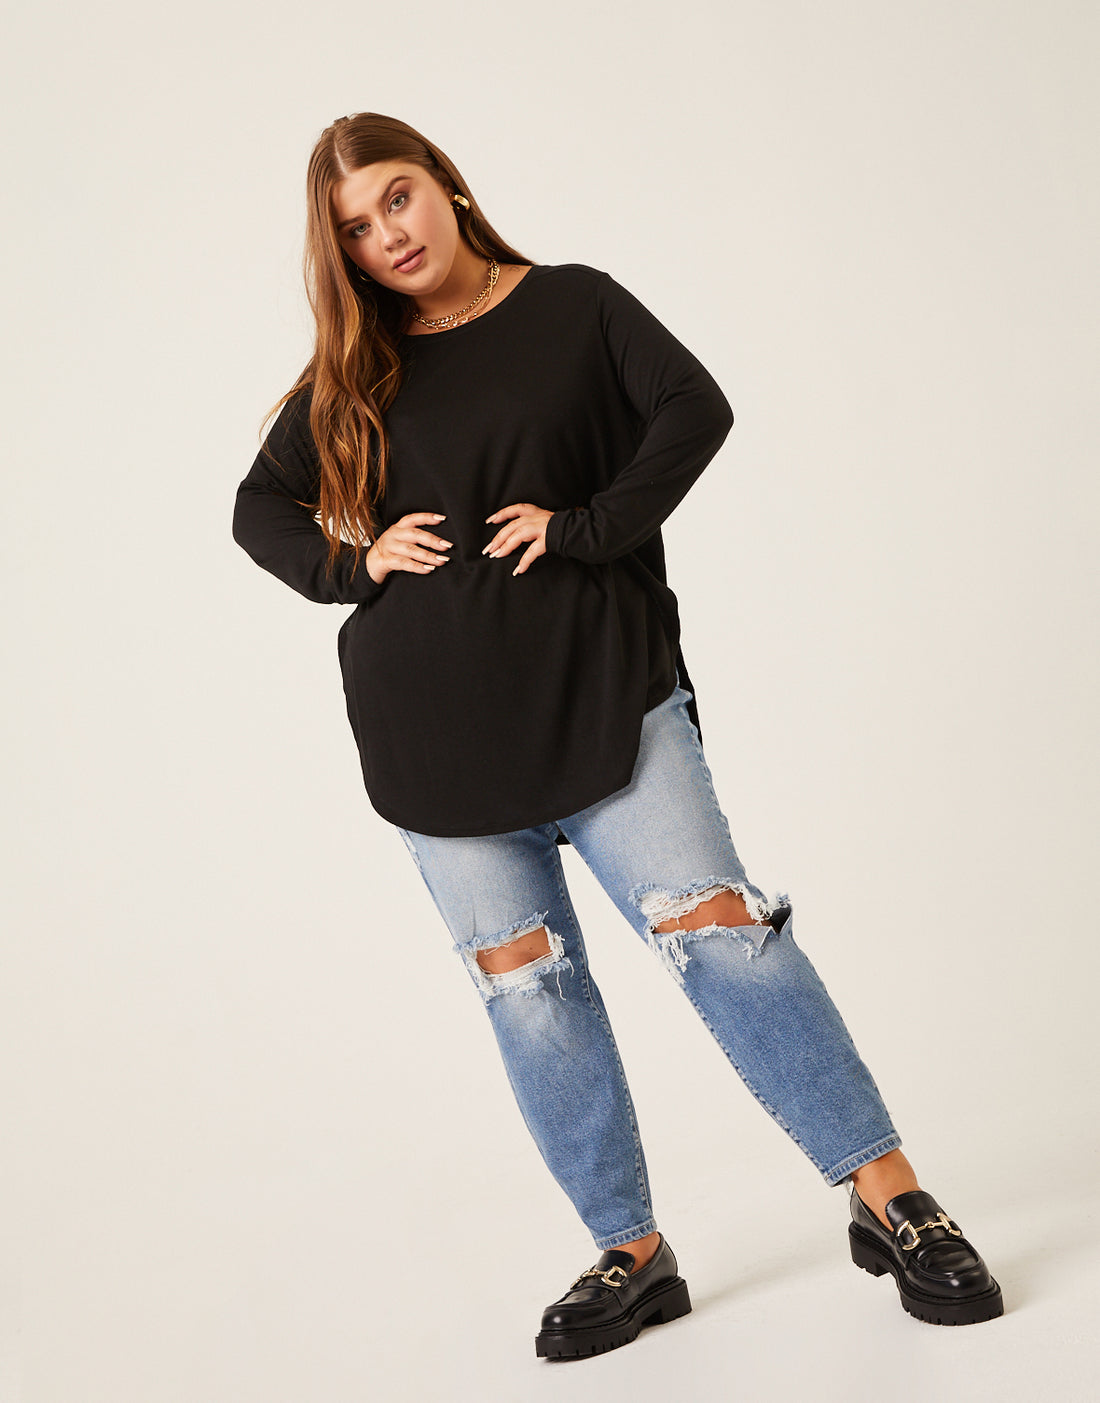 Curve Knit Flowy Long Sleeve Tee Plus Size Tops -2020AVE